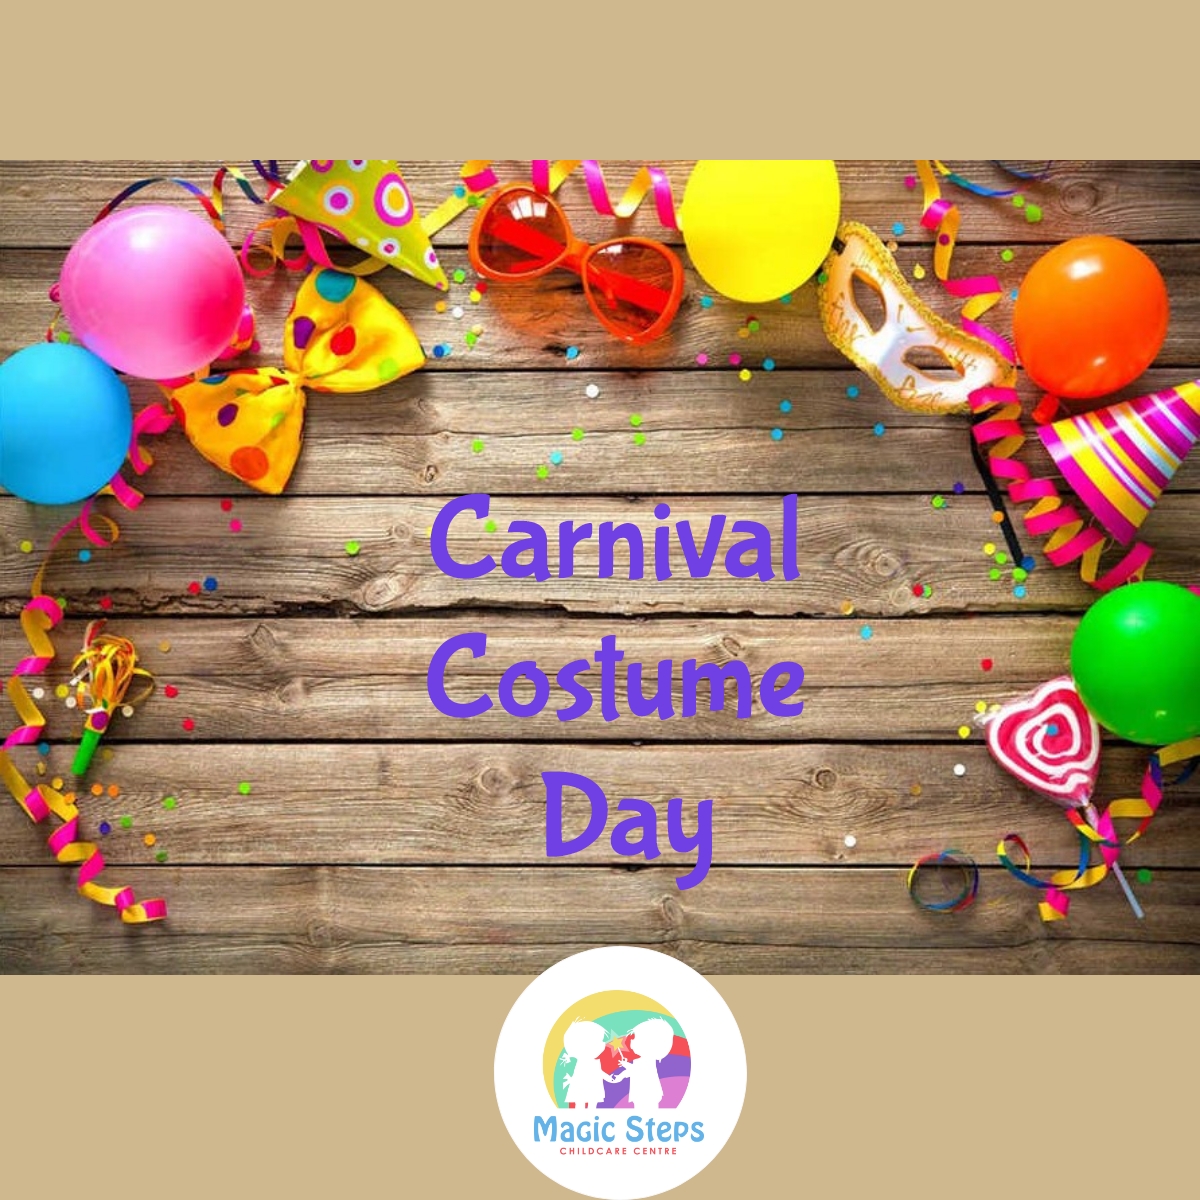 Carnival Costume Day- Friday 12th February